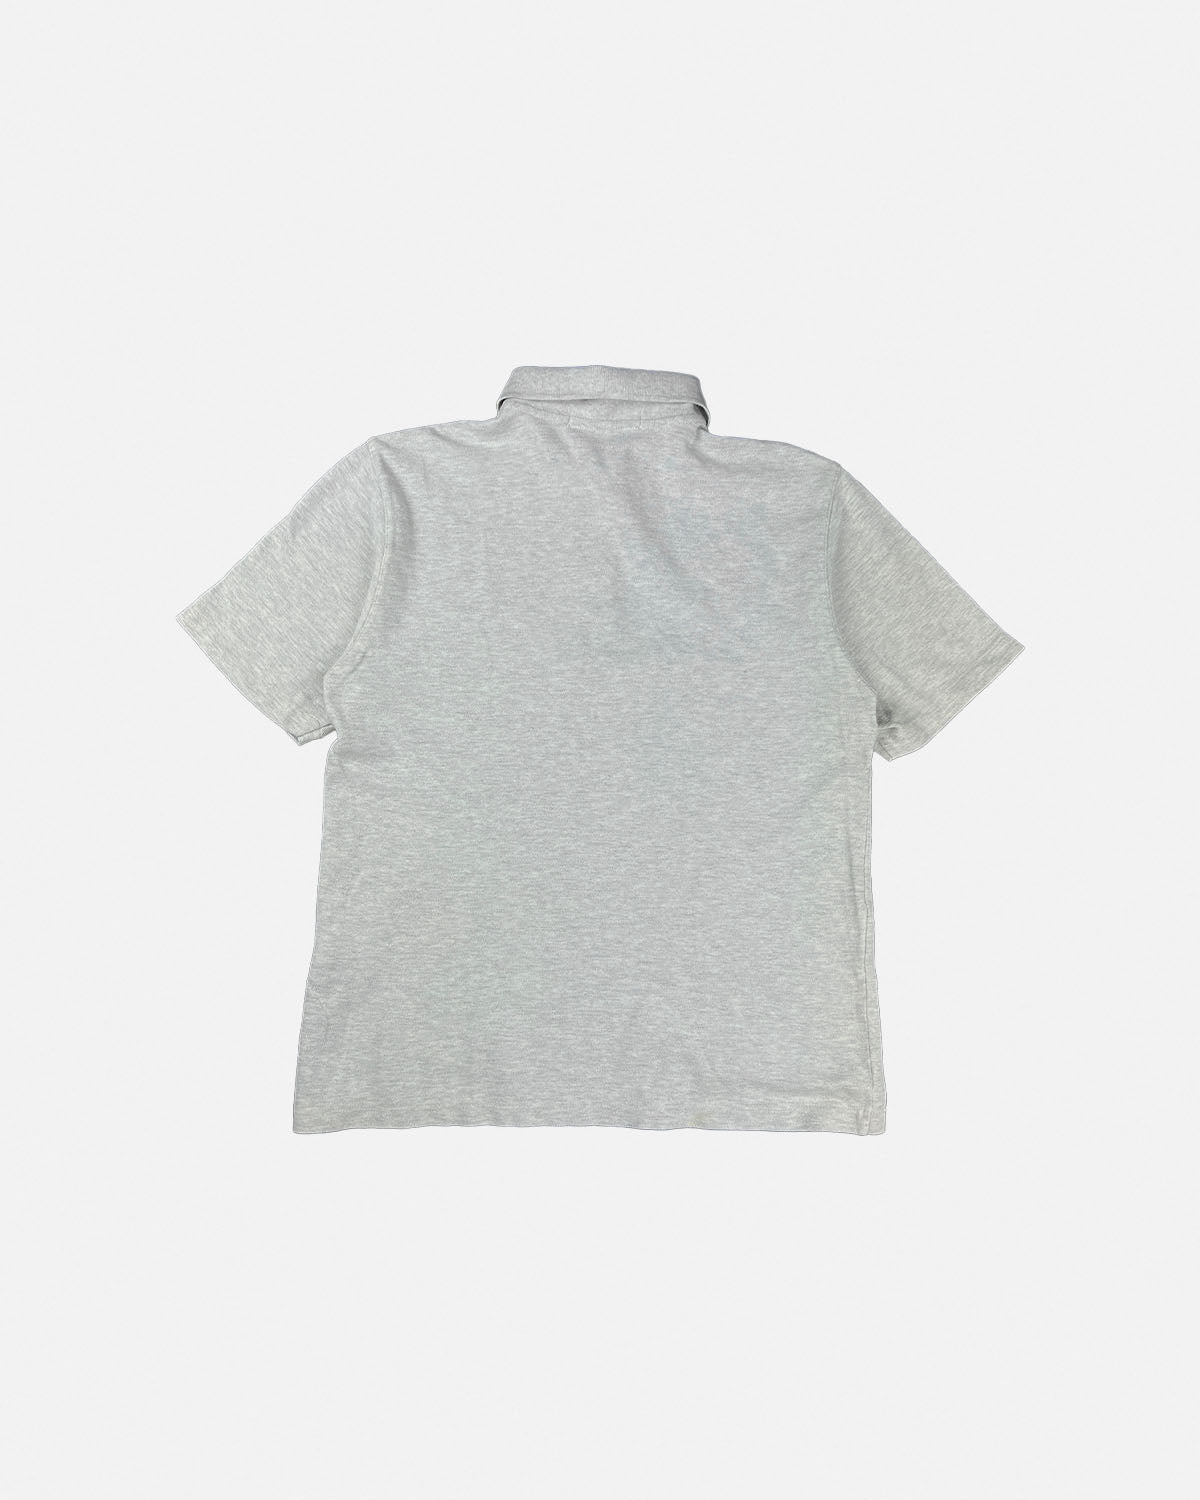 Balenciaga Grey Scattered Letters Polo